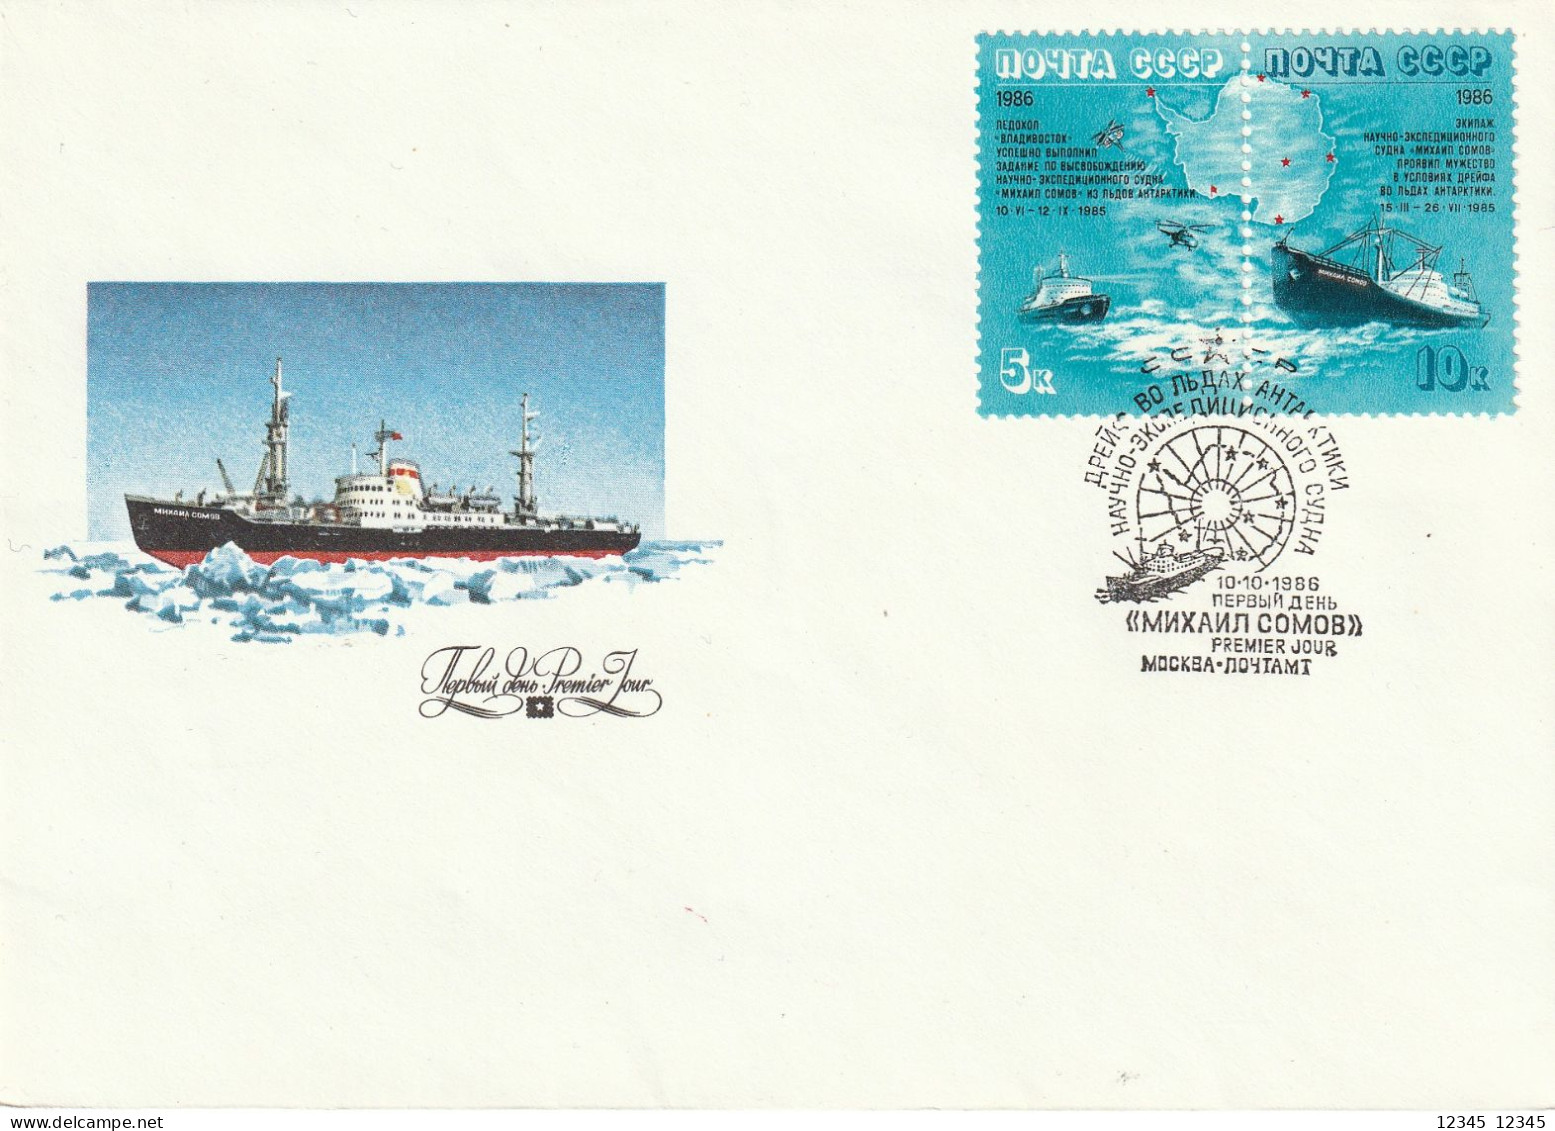 Sowjet Unie 1986, FDC Unused, Drift Of The Research Vessel “Mikhail Somov” In The Ice Of Antarctica. - FDC